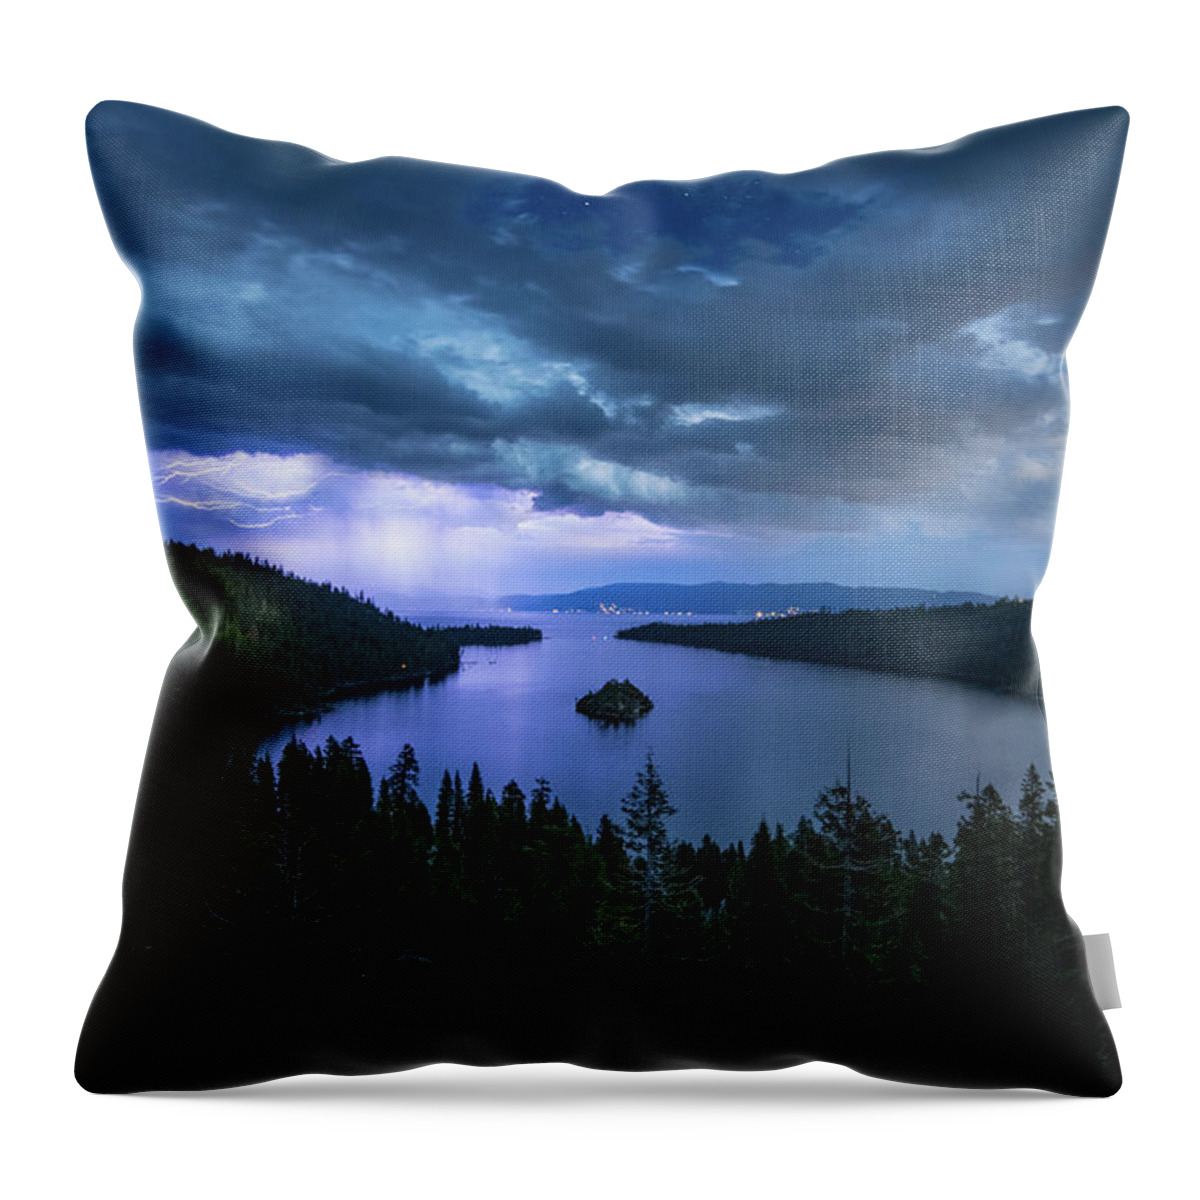 Emerald Bay Throw Pillow featuring the photograph Emerald Bay Electric Skies by Brad Scott by Brad Scott